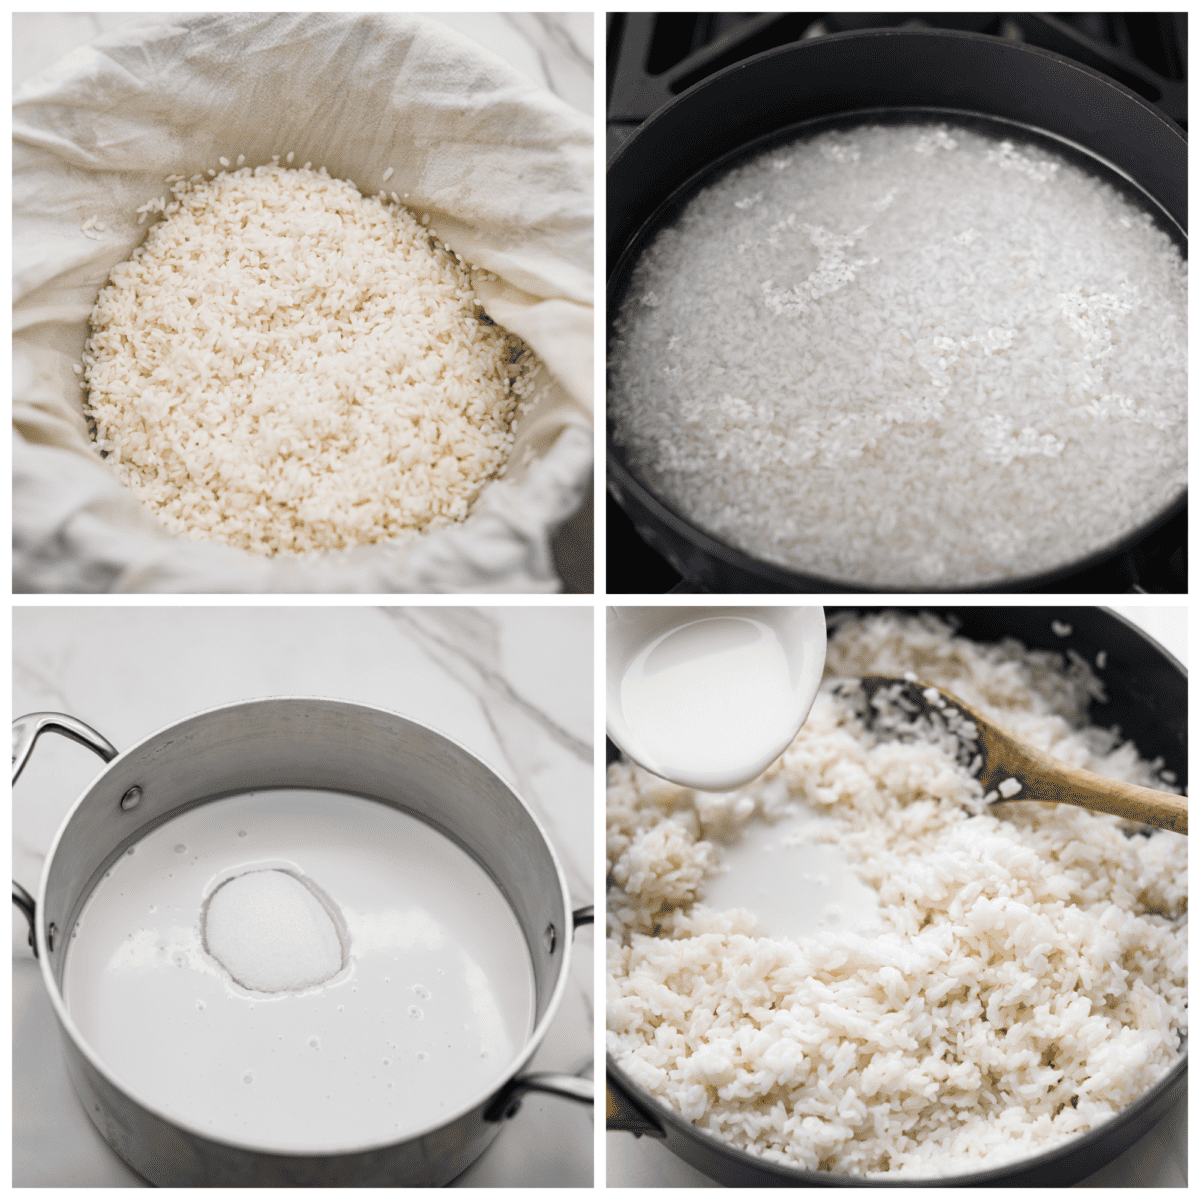 4-photo collage of the rice and sauce being prepared.